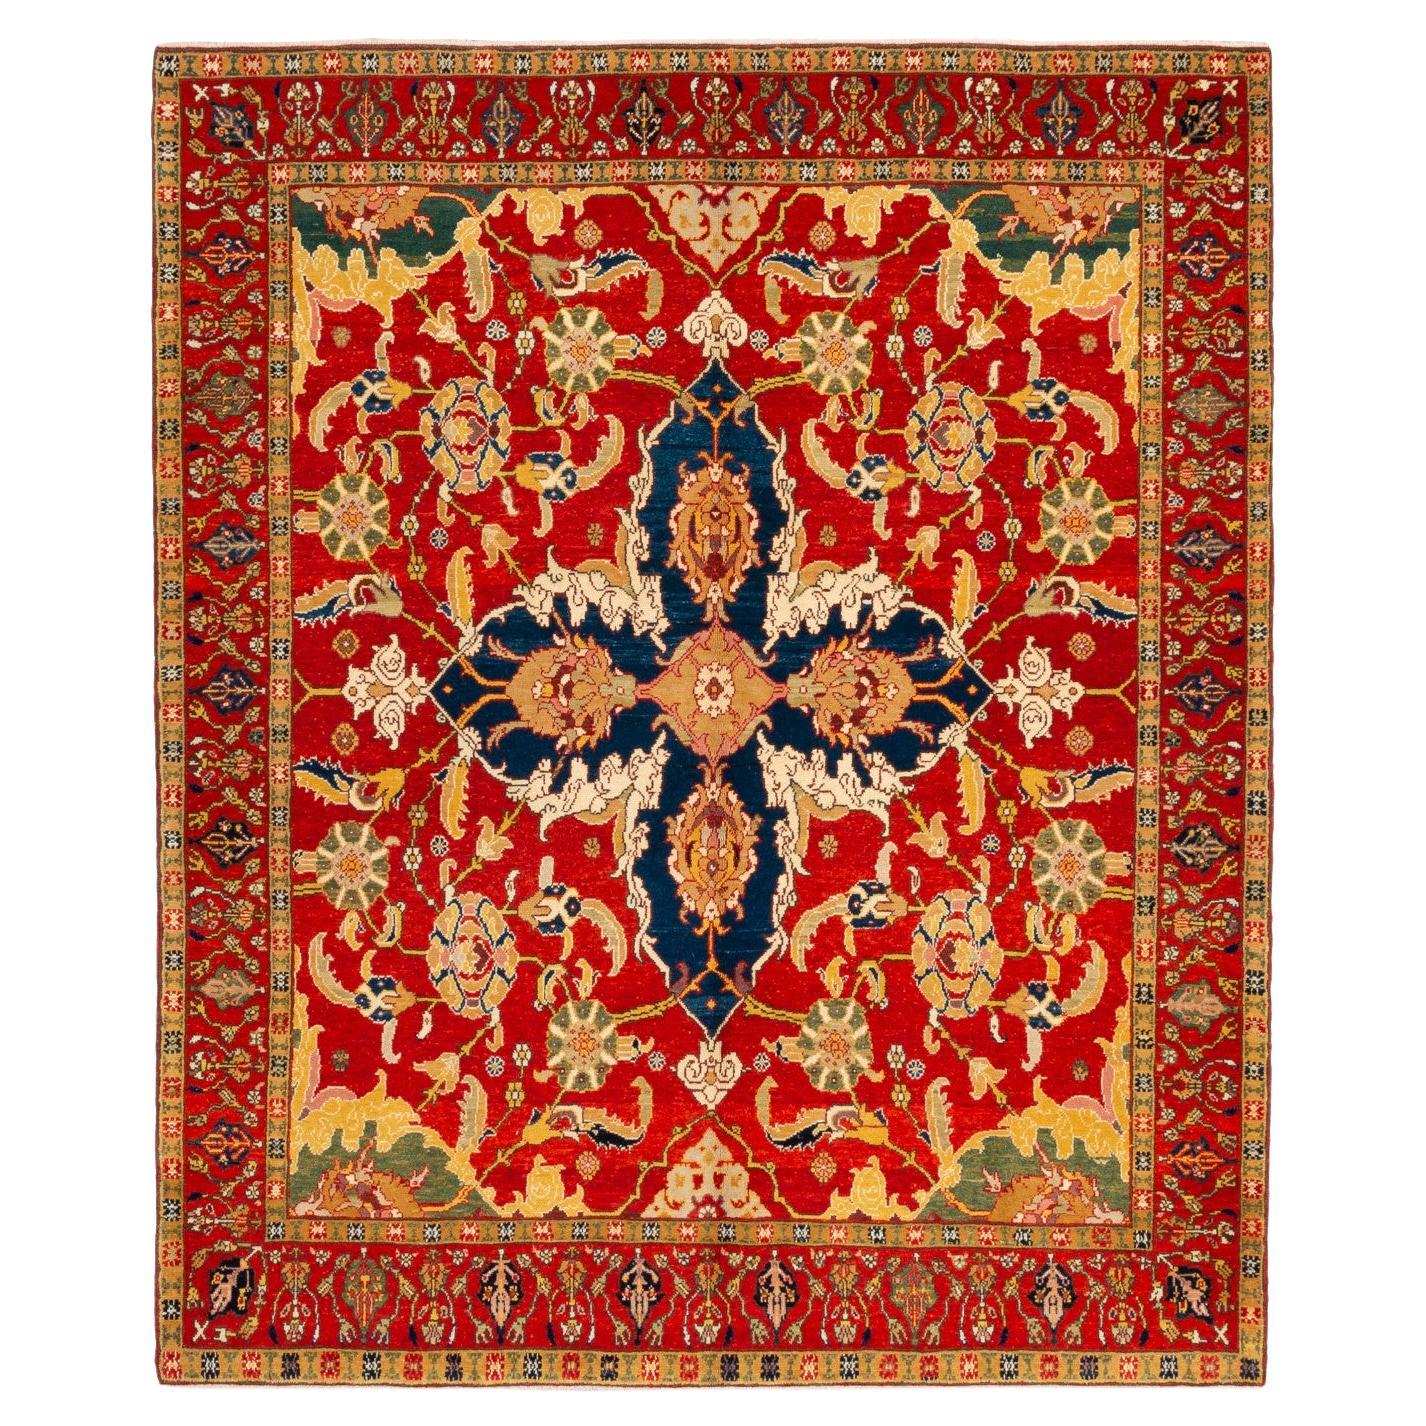 Ararat Rugs Turkish Court Manufactury Rug Ottoman Revival Rug Natural Dyed